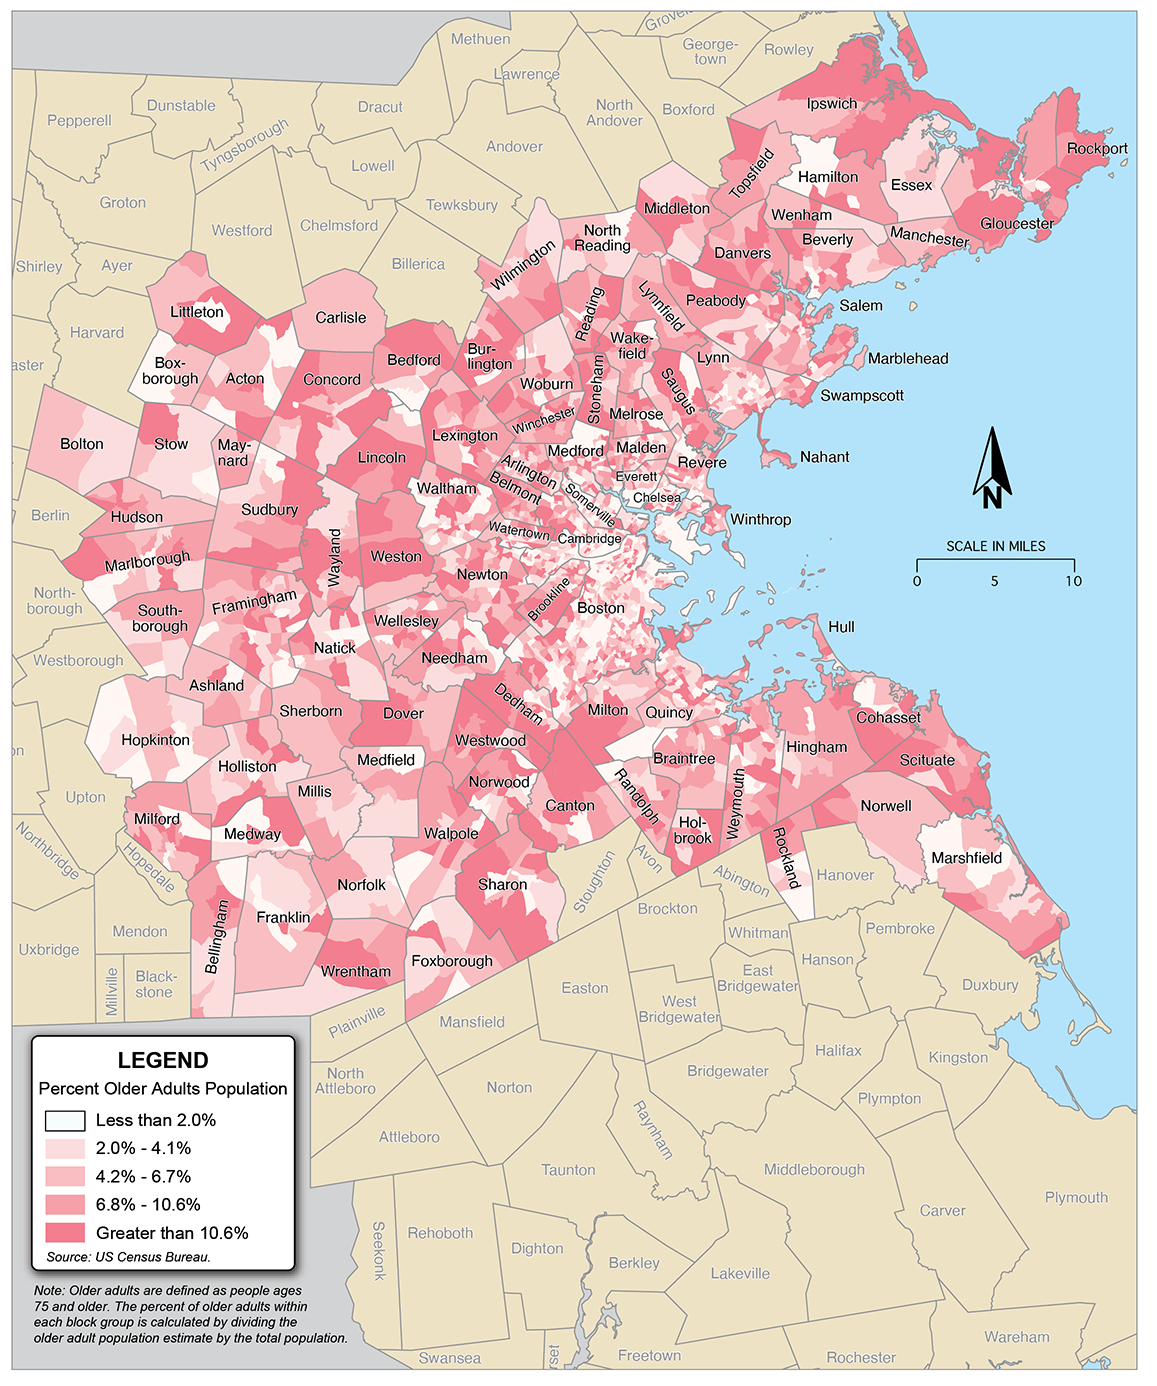 Figure 6-6 is a map showing the percent of the population that is age 75 or older in each block group across the 97 communities in the Boston region.